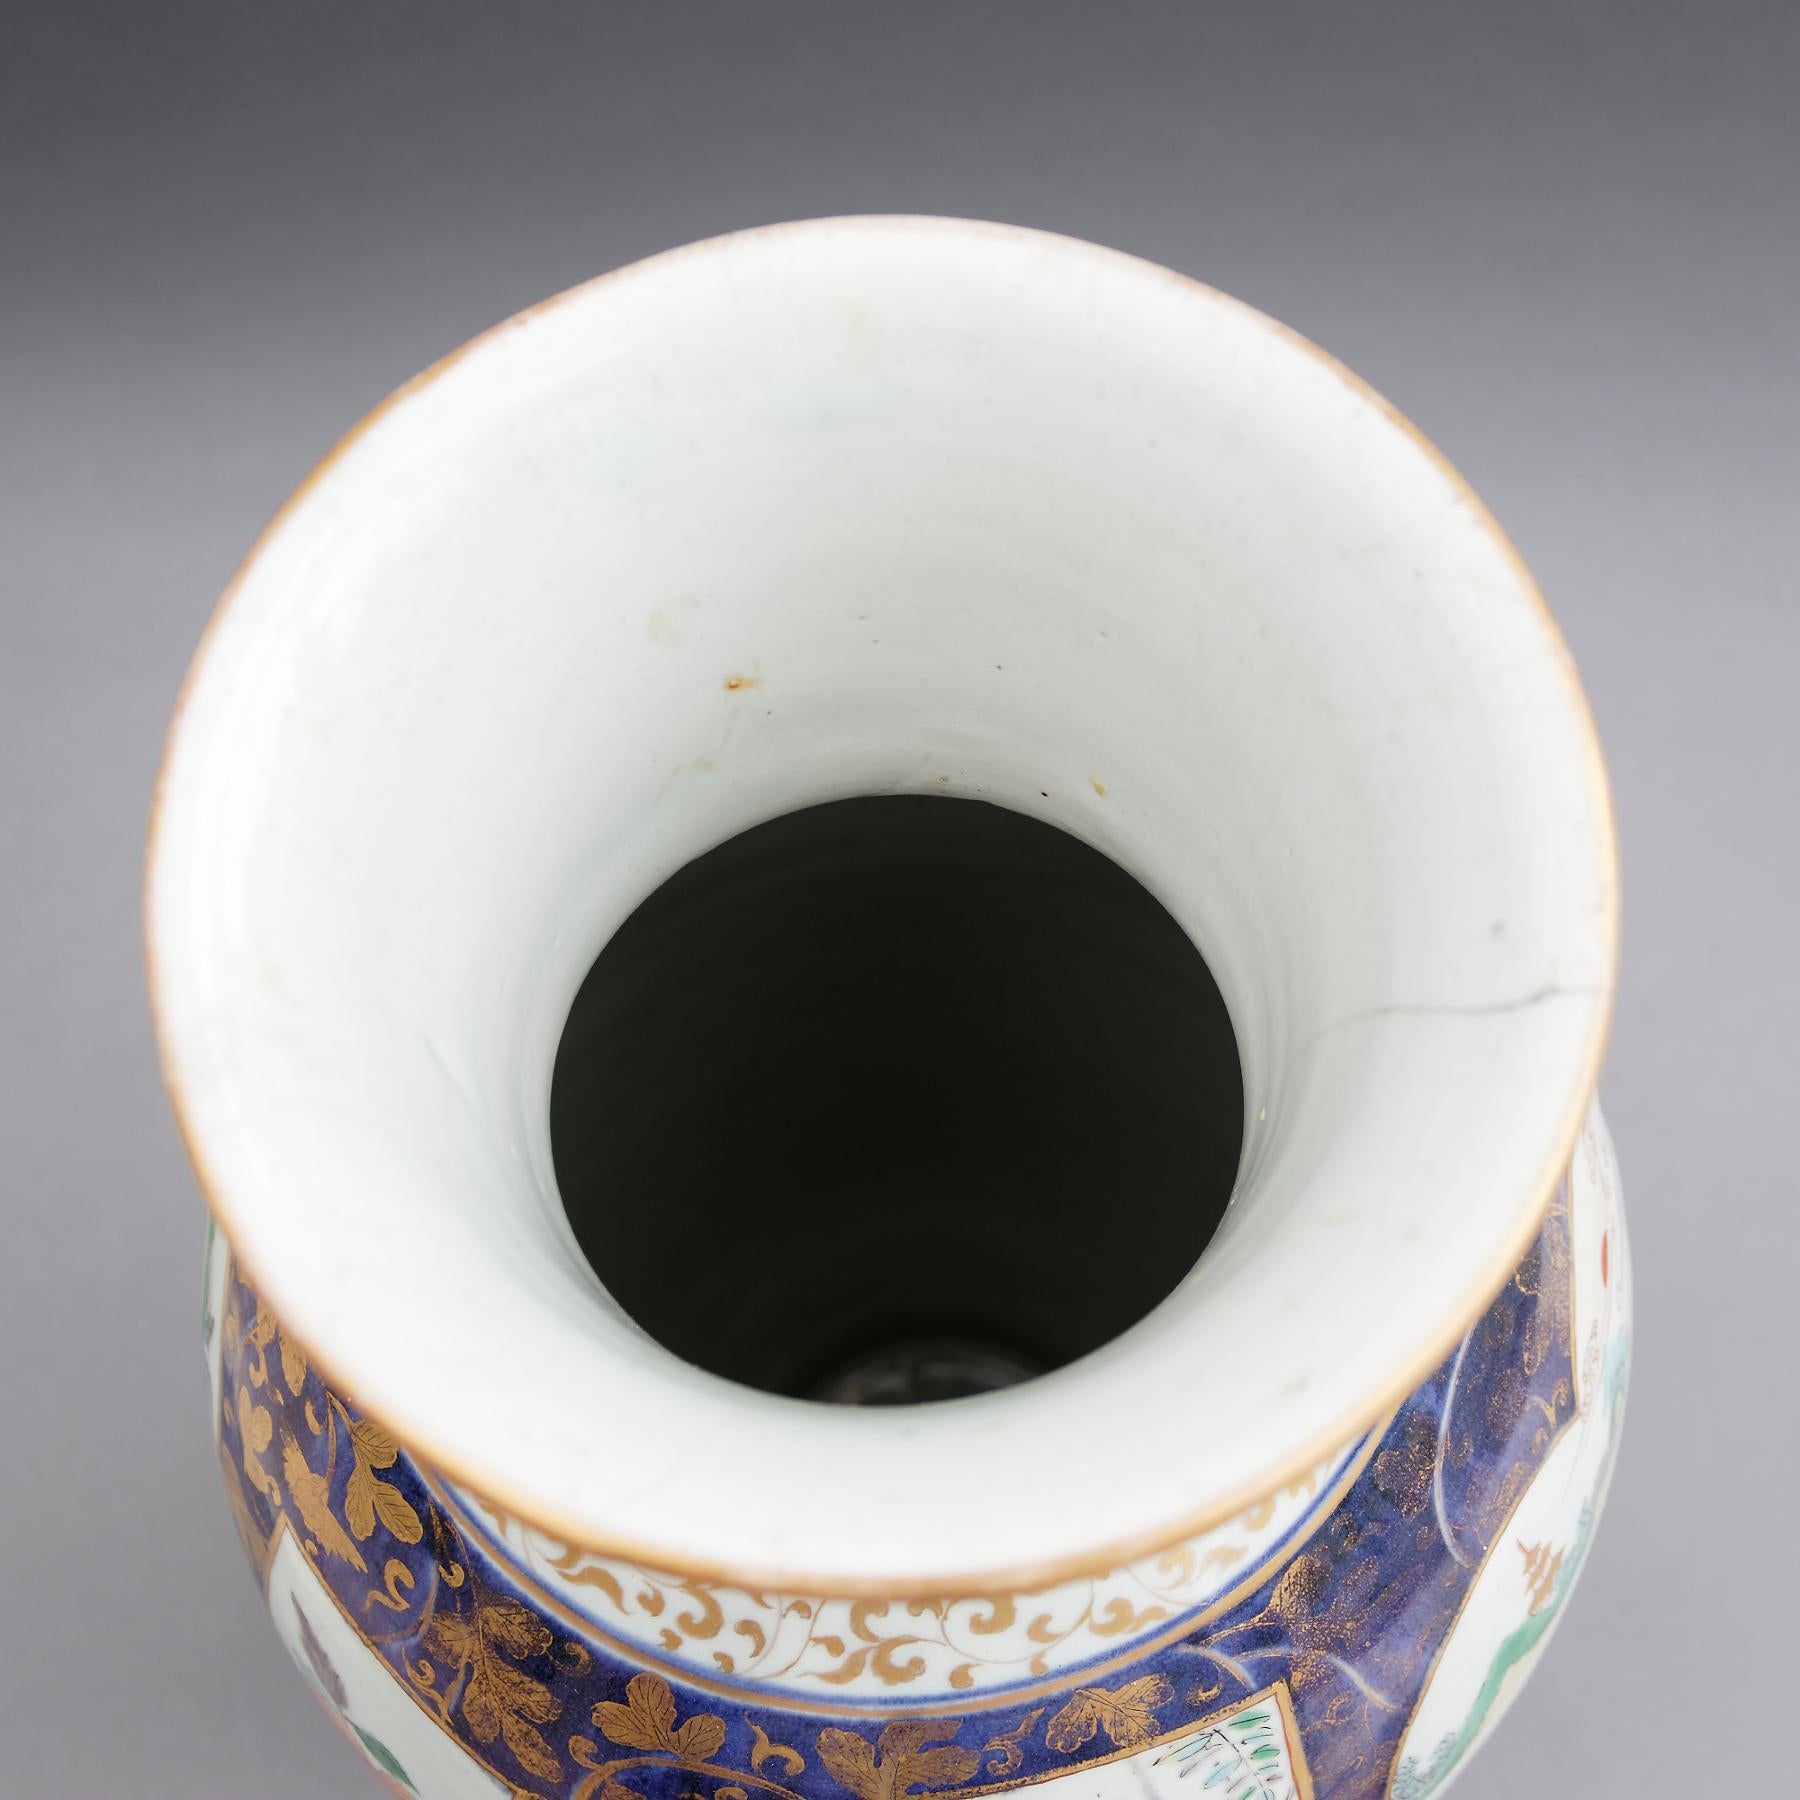 A rare Japanese late 17th-early 18th century Imari vase of beaker-type, porcelain of elongated ovoid shape with flaring neck, painted in the Imari palette of underglaze blue with overglaze iron-red and green enamel with details in gold. The dense